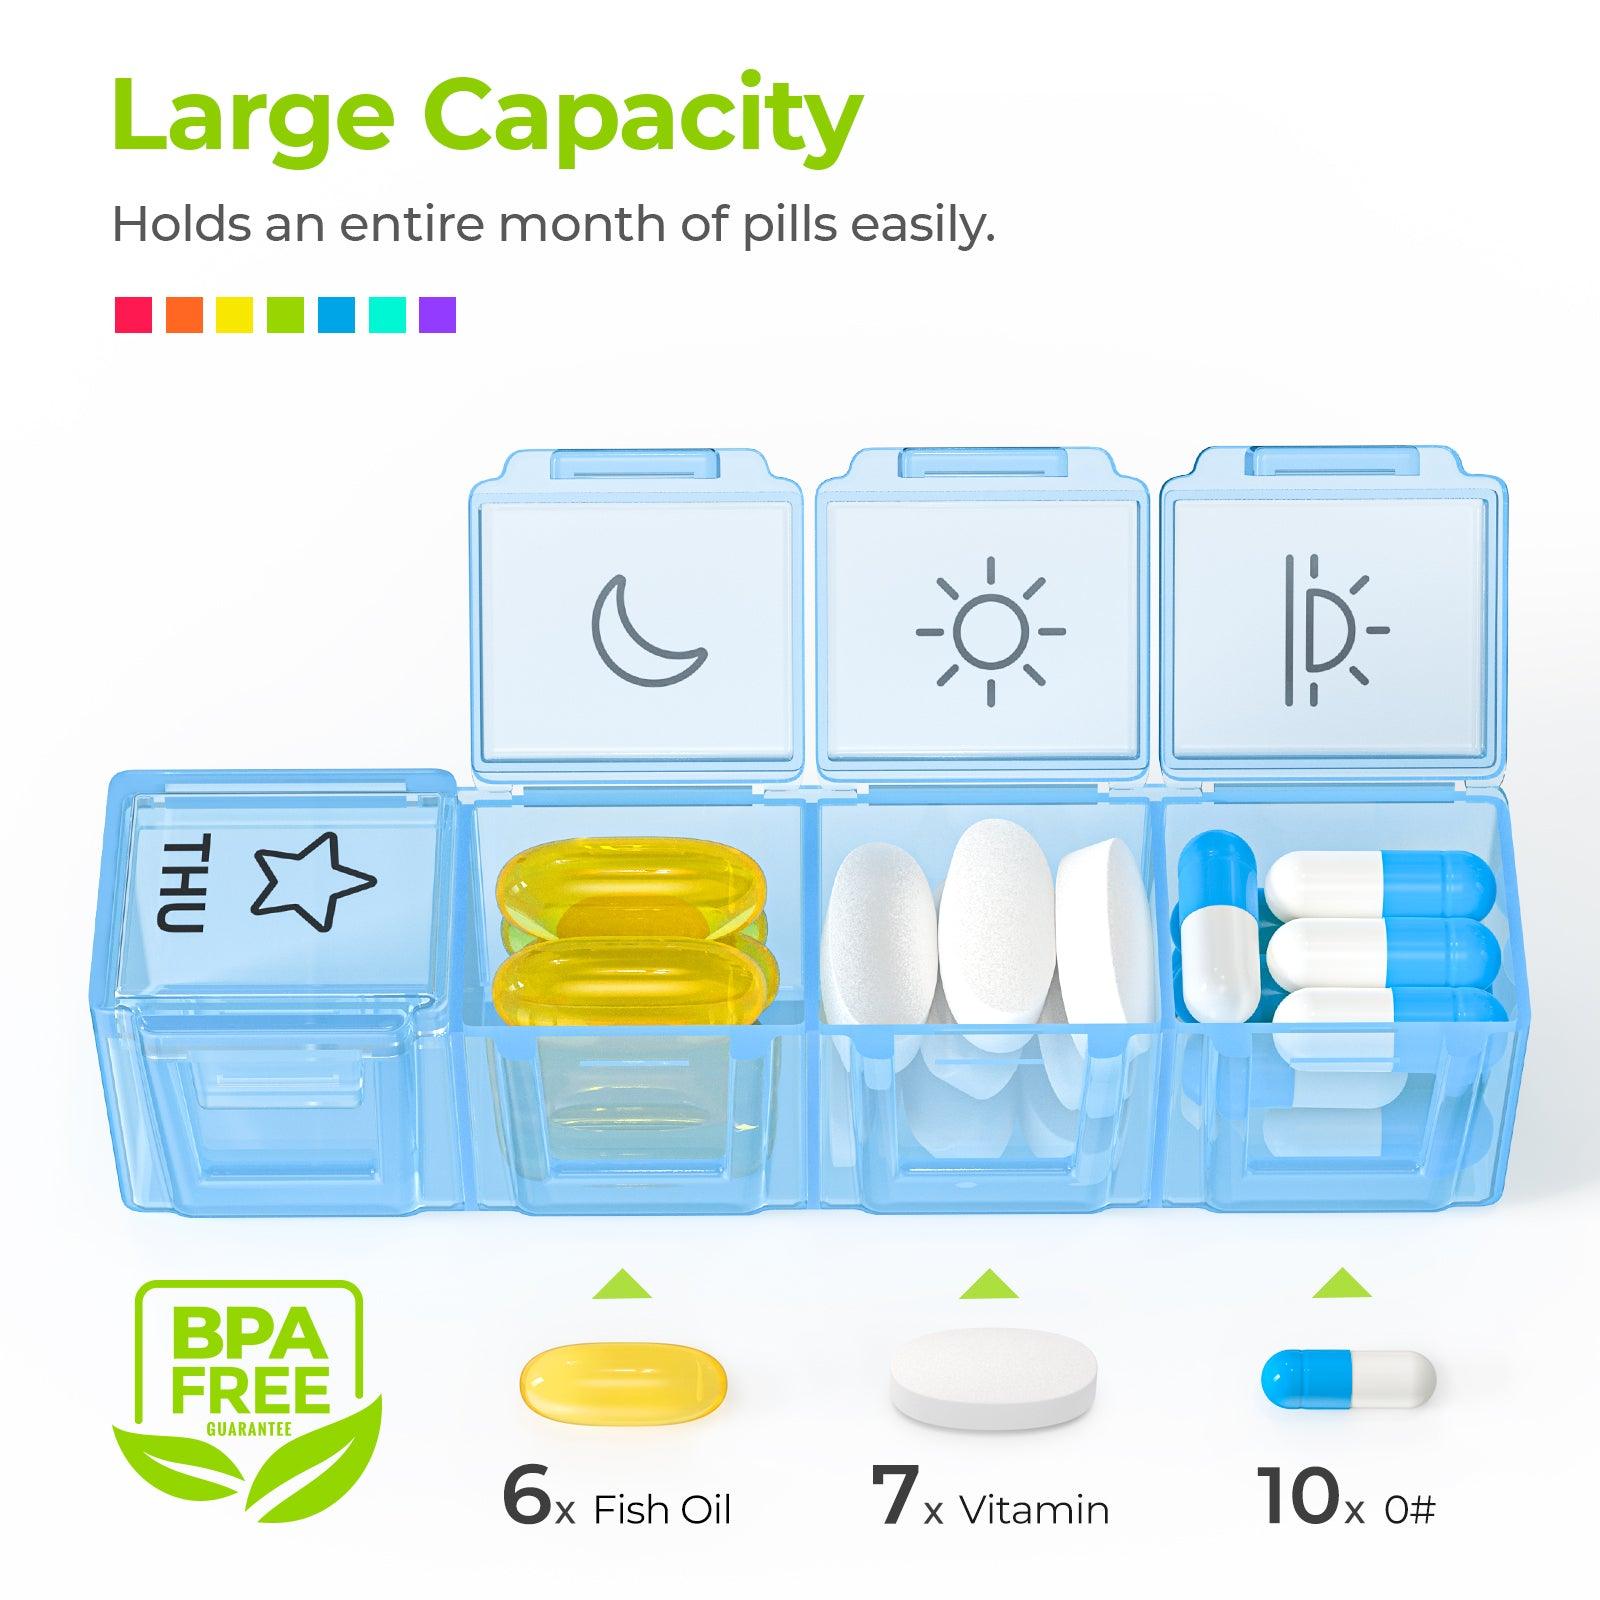 AUVON iMedassist Moisture-Proof Weekly Pill Organizer 4 Times a Day, Large 7 Day Pill Box Portable for Travel with Removable Individual Pill Containers to Hold Vitamins, Supplements and Medication - AUVON